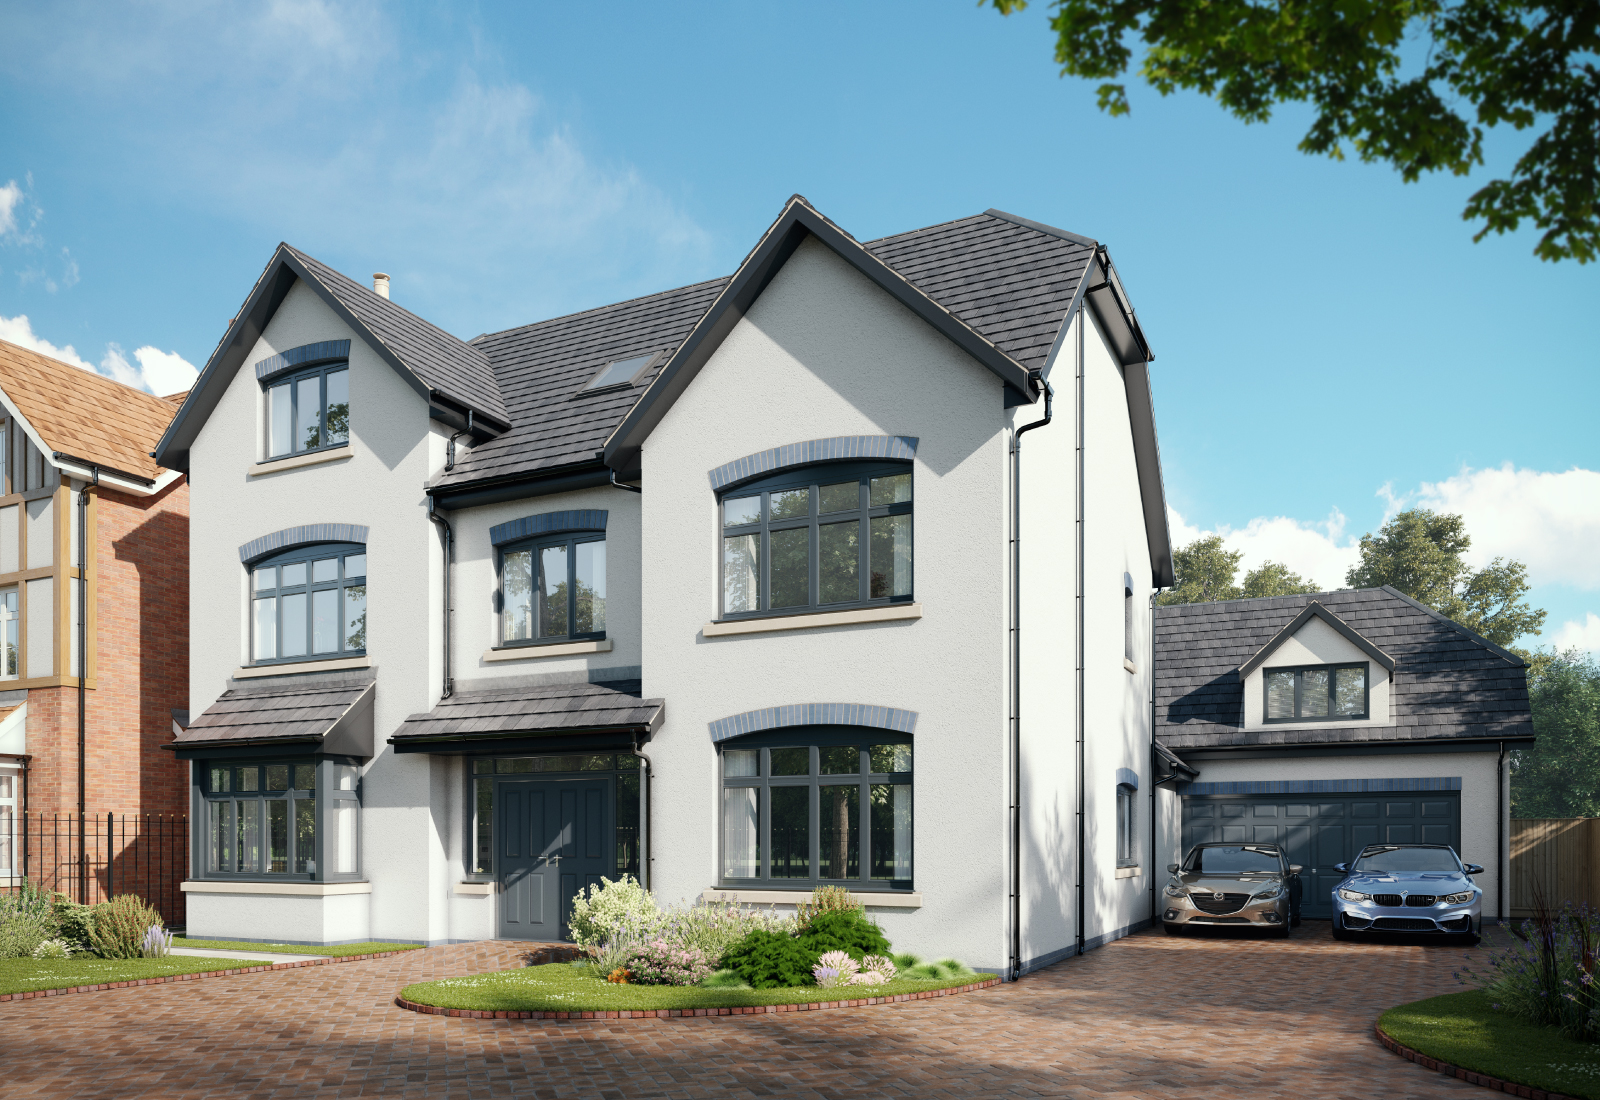 Chance to take a look inside exclusive home on Adlington Road, Wilmslow